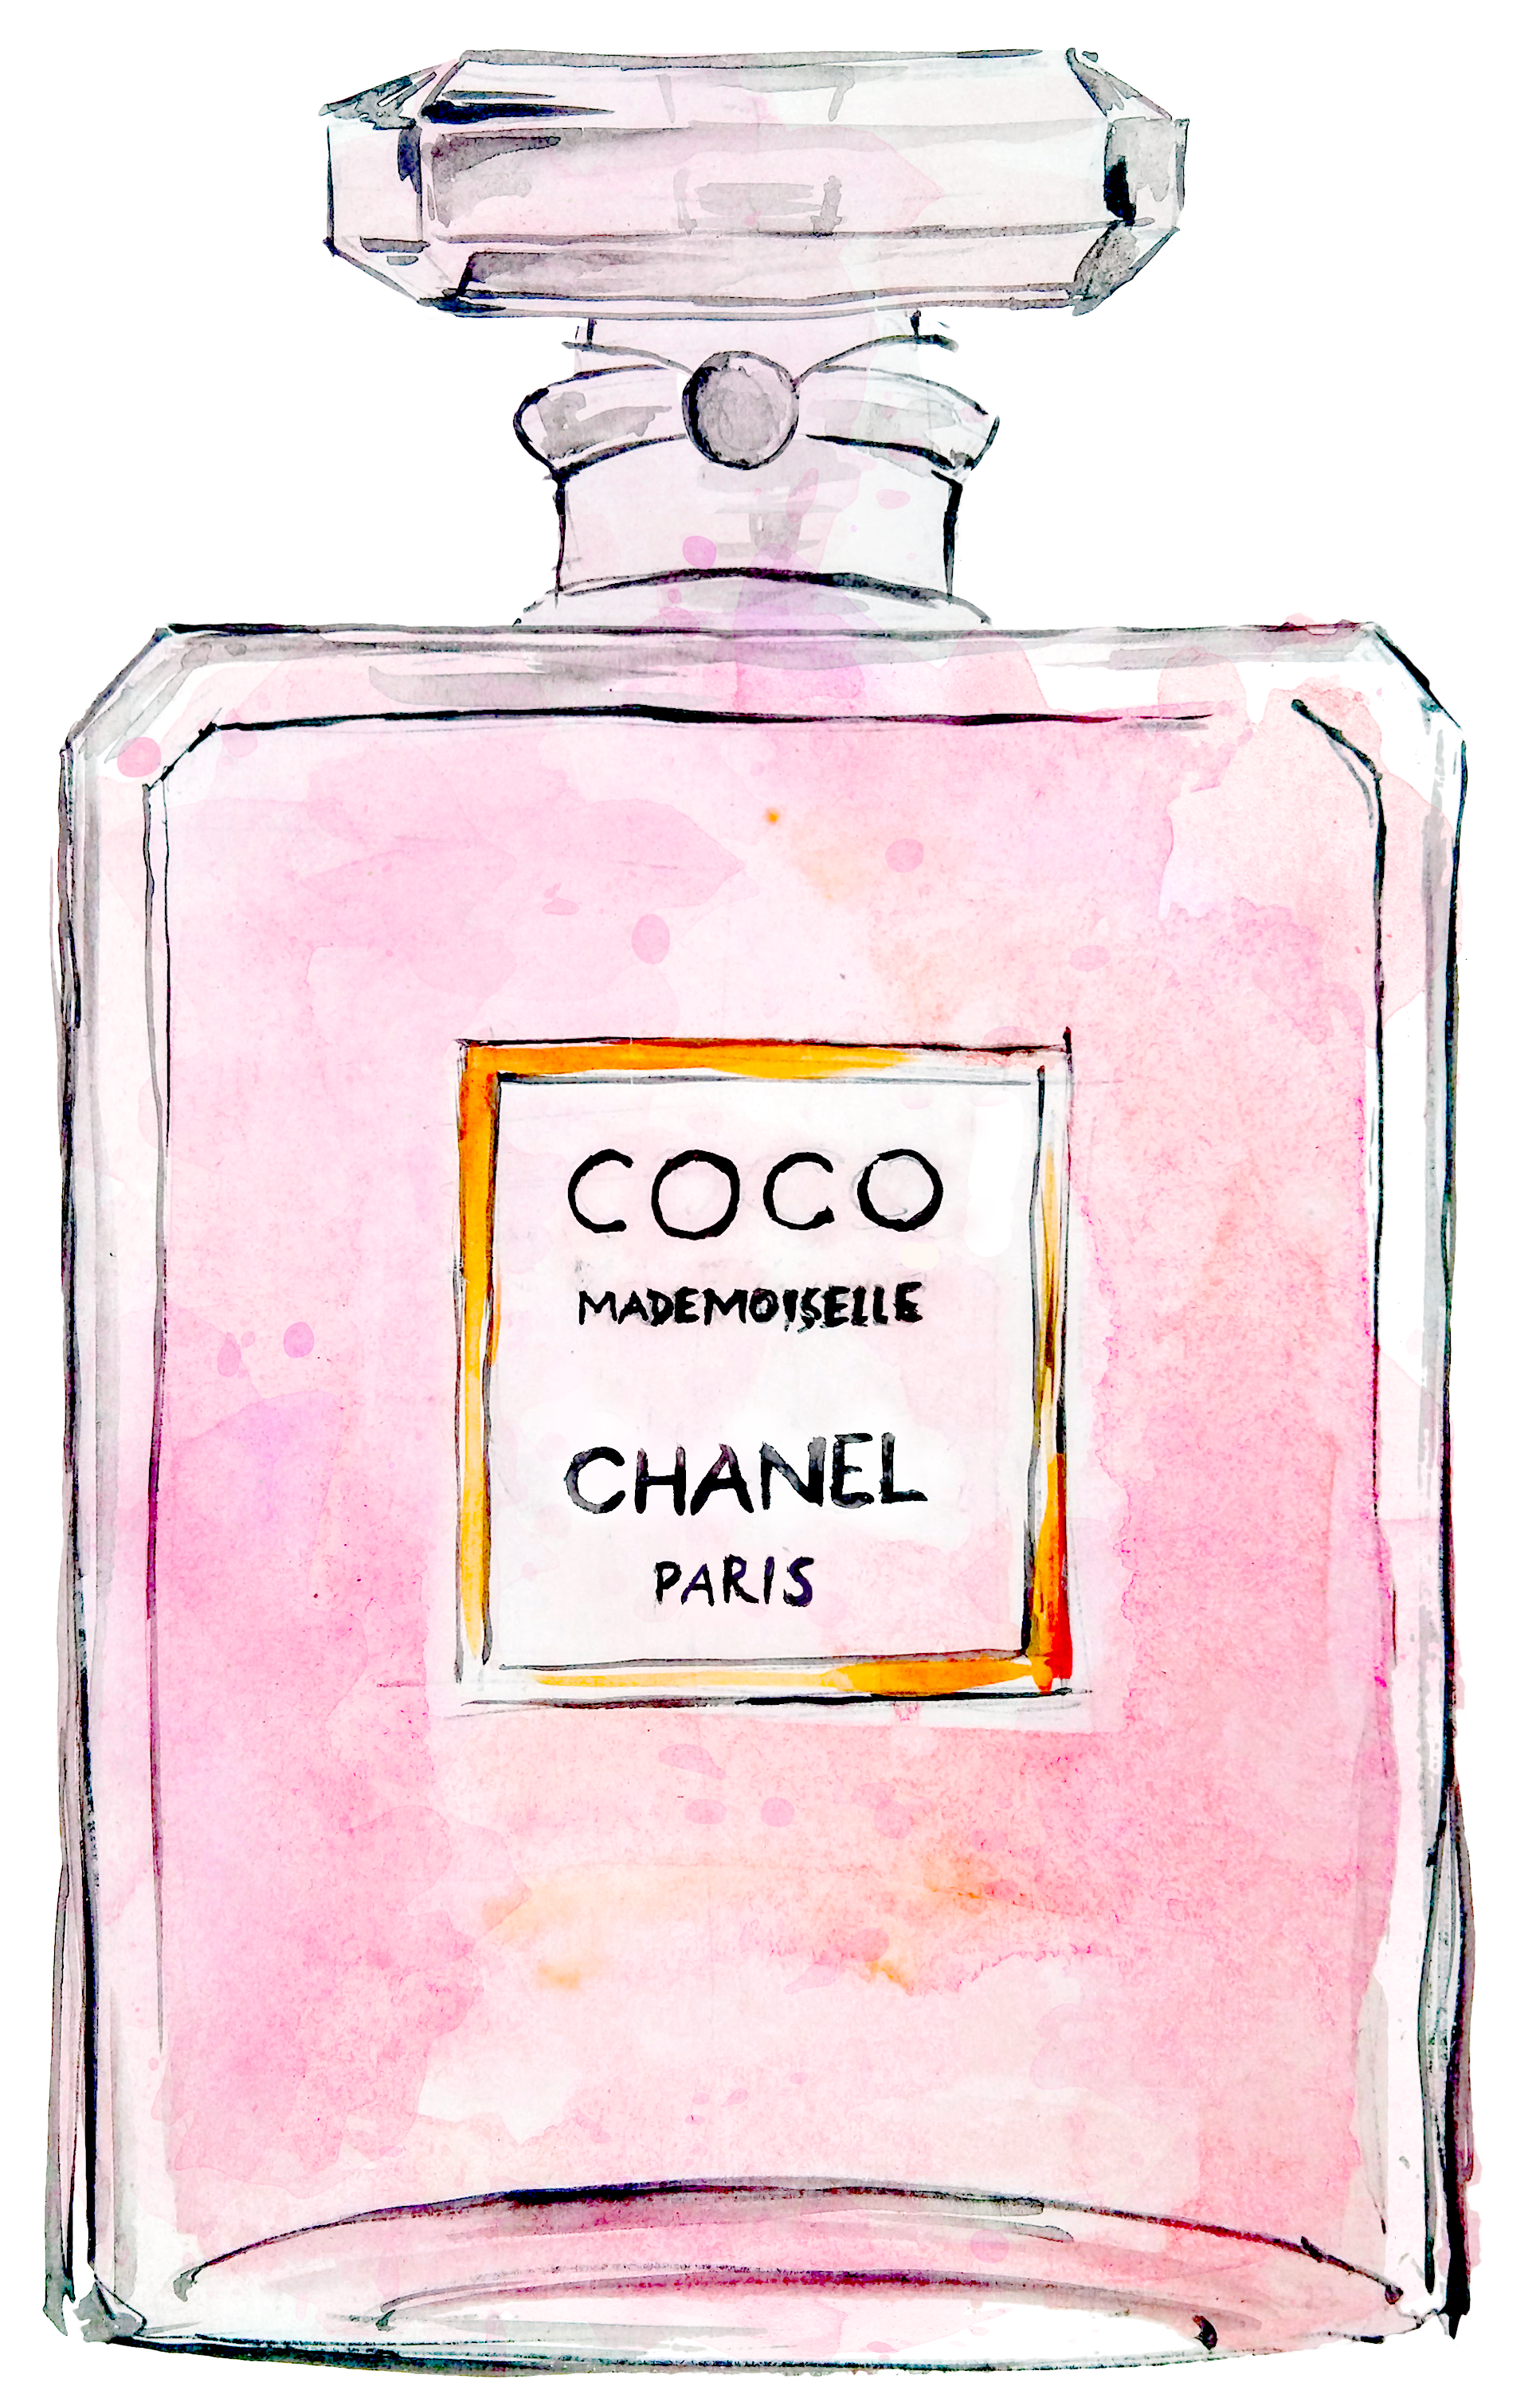 Mademoiselle No. Chanel,Coco Perfume Coco Chanel PNG Image